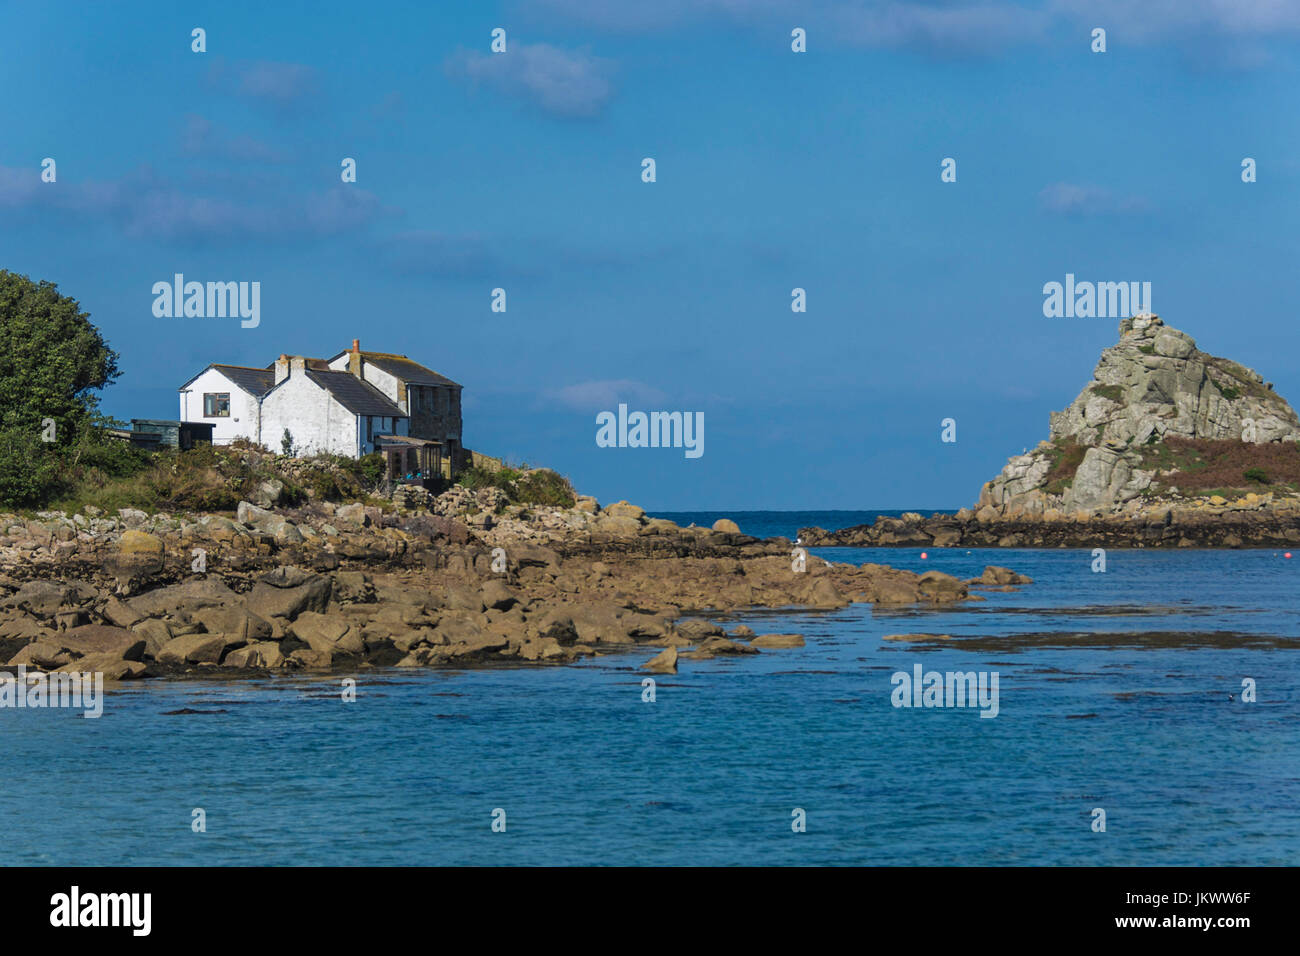 Isles of Scilly, Cornwall, England Stock Photo